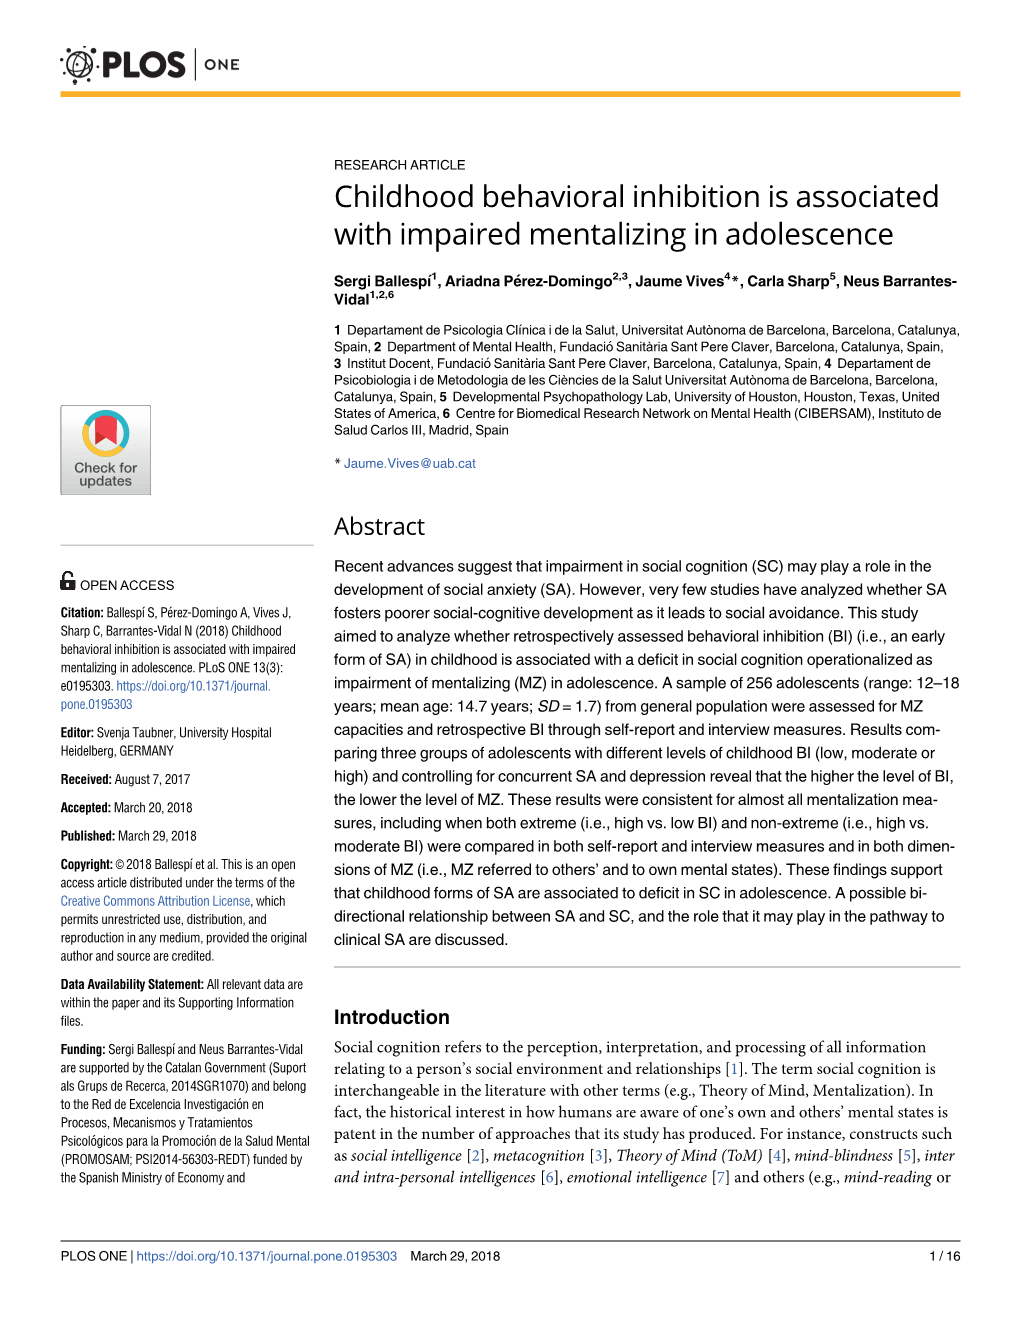 Childhood Behavioral Inhibition Is Associated with Impaired Mentalizing in Adolescence